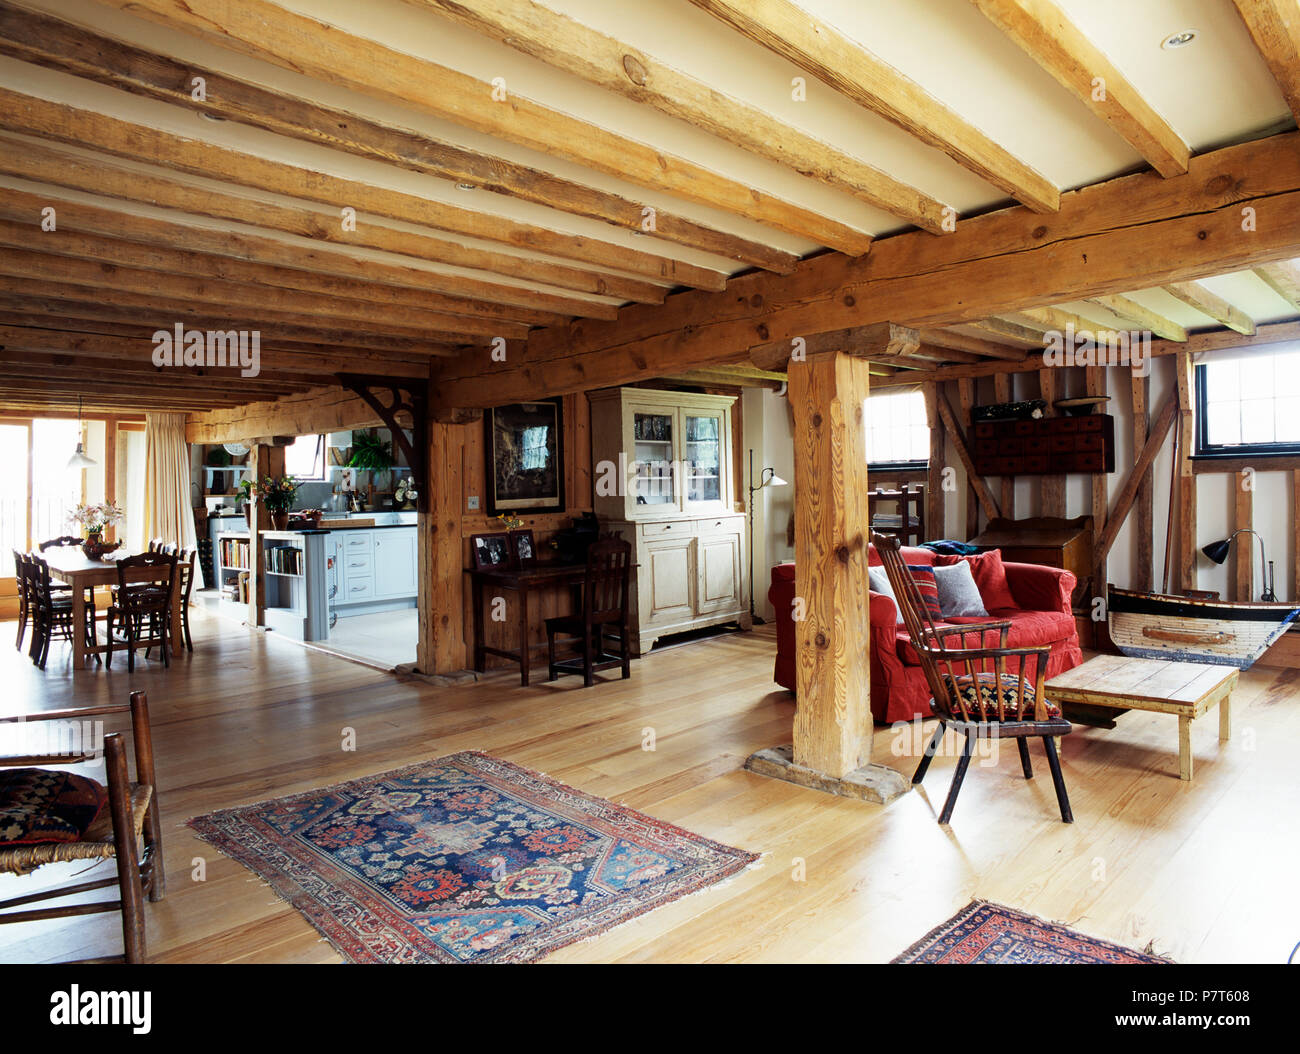 Rustic wooden beams in large open-plan living and dining room in converted barn Stock Photo